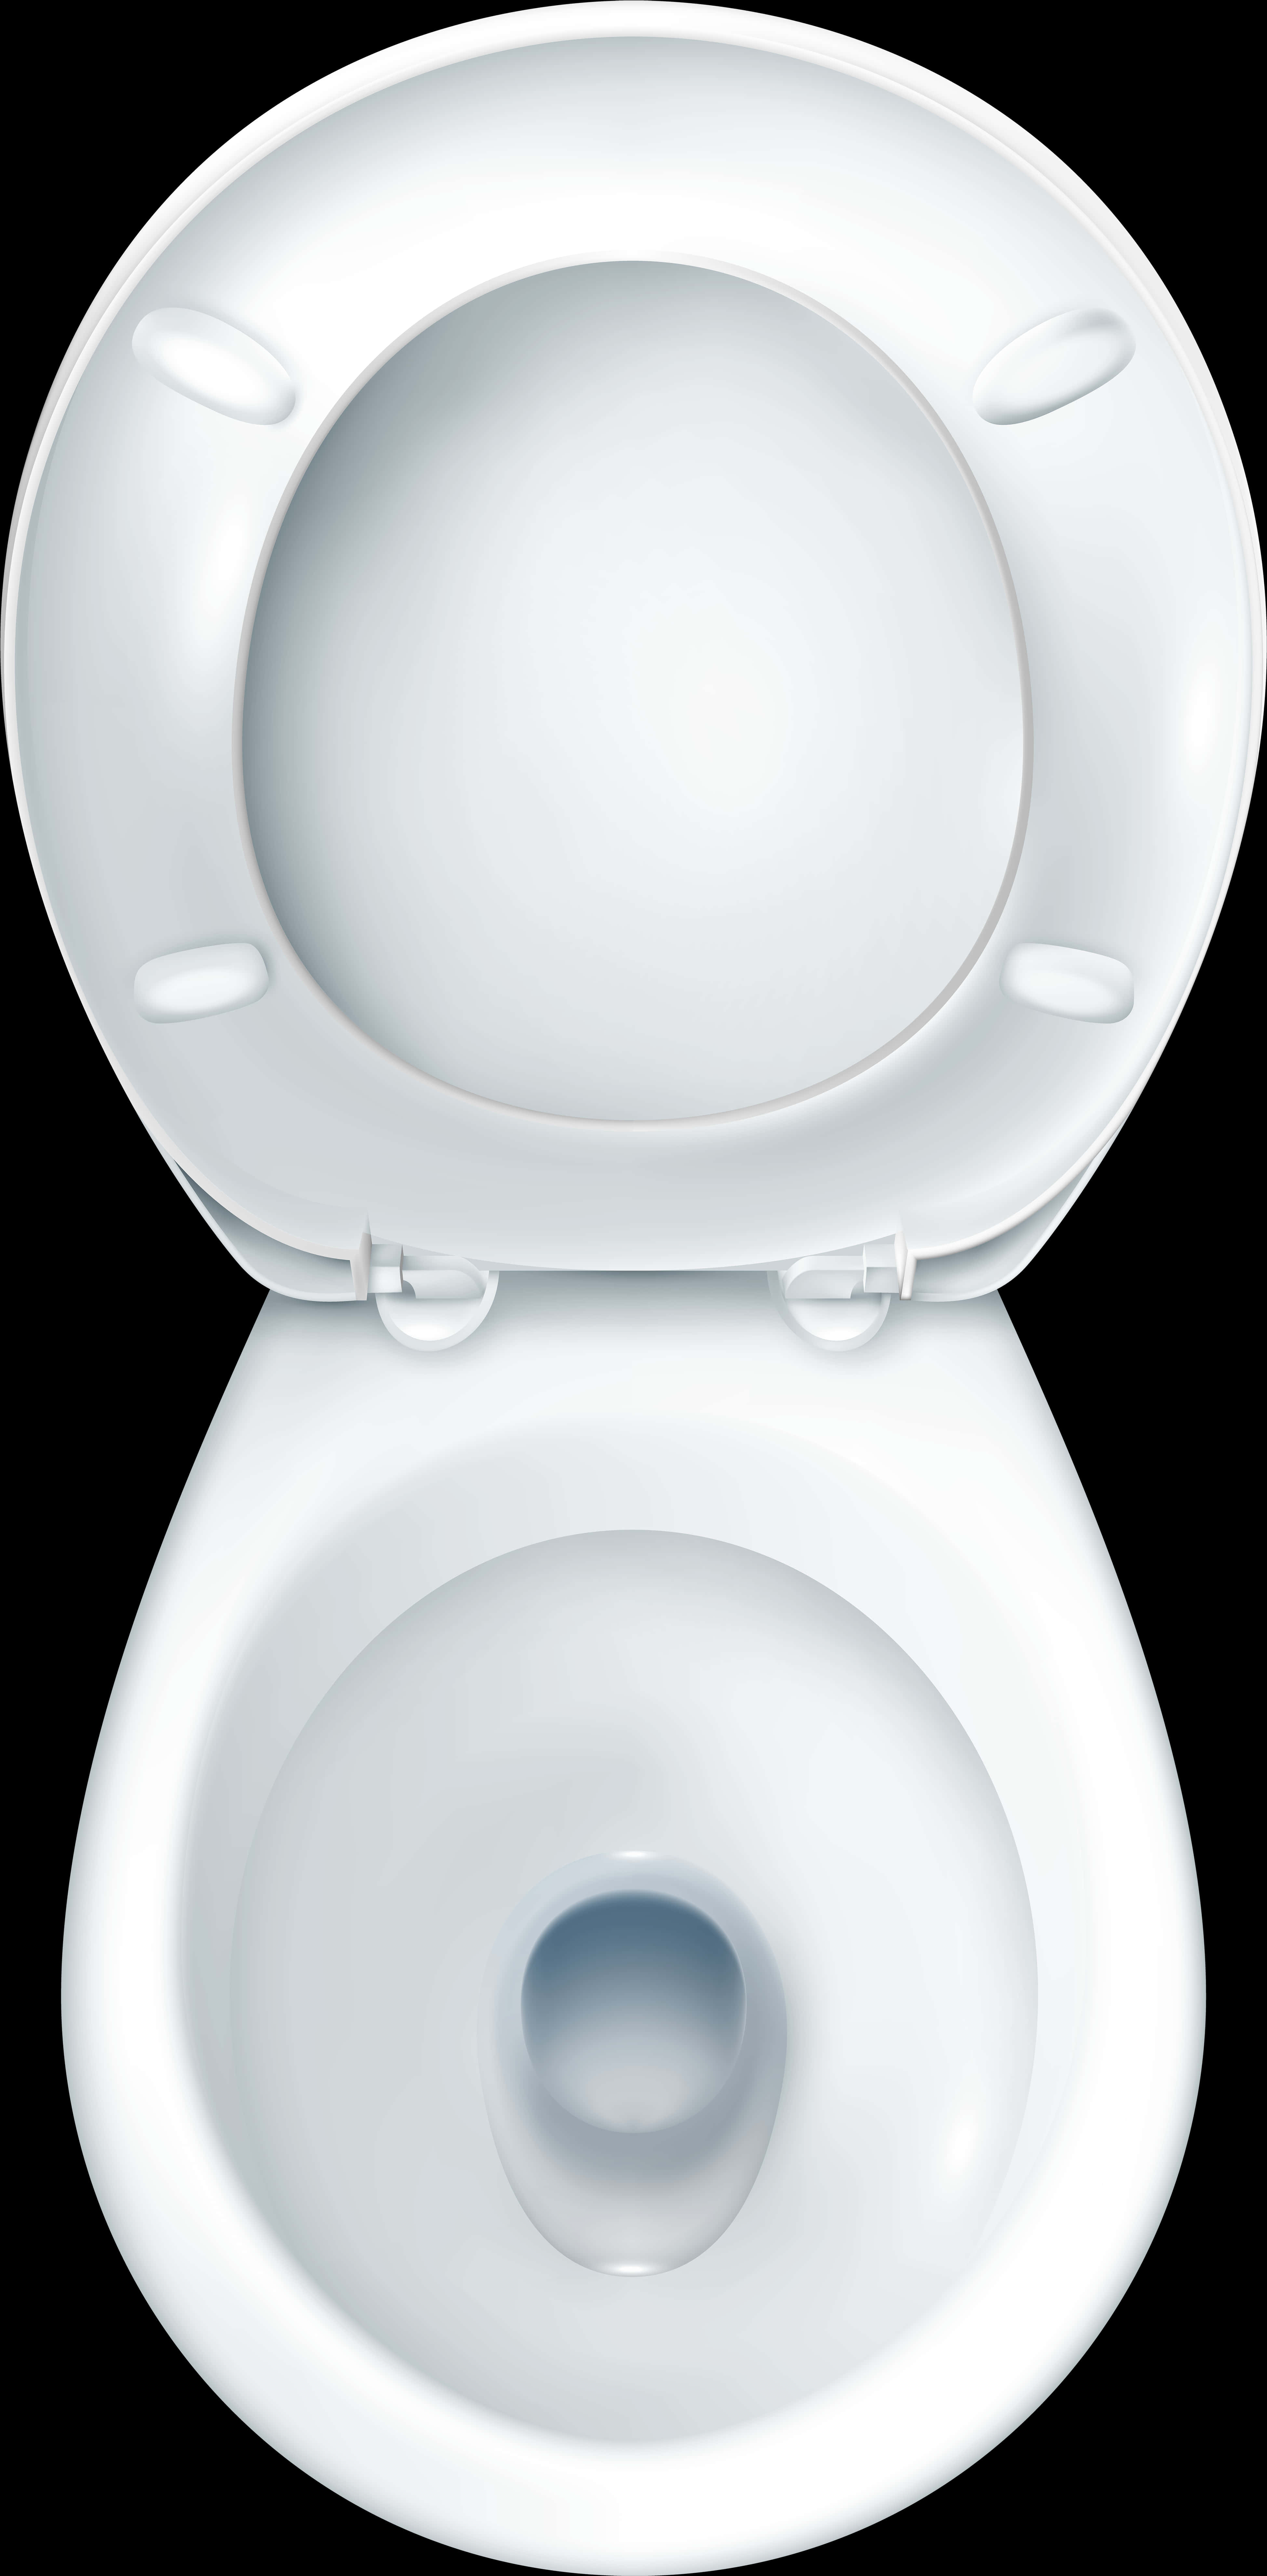 A White Toilet With A Seat Open